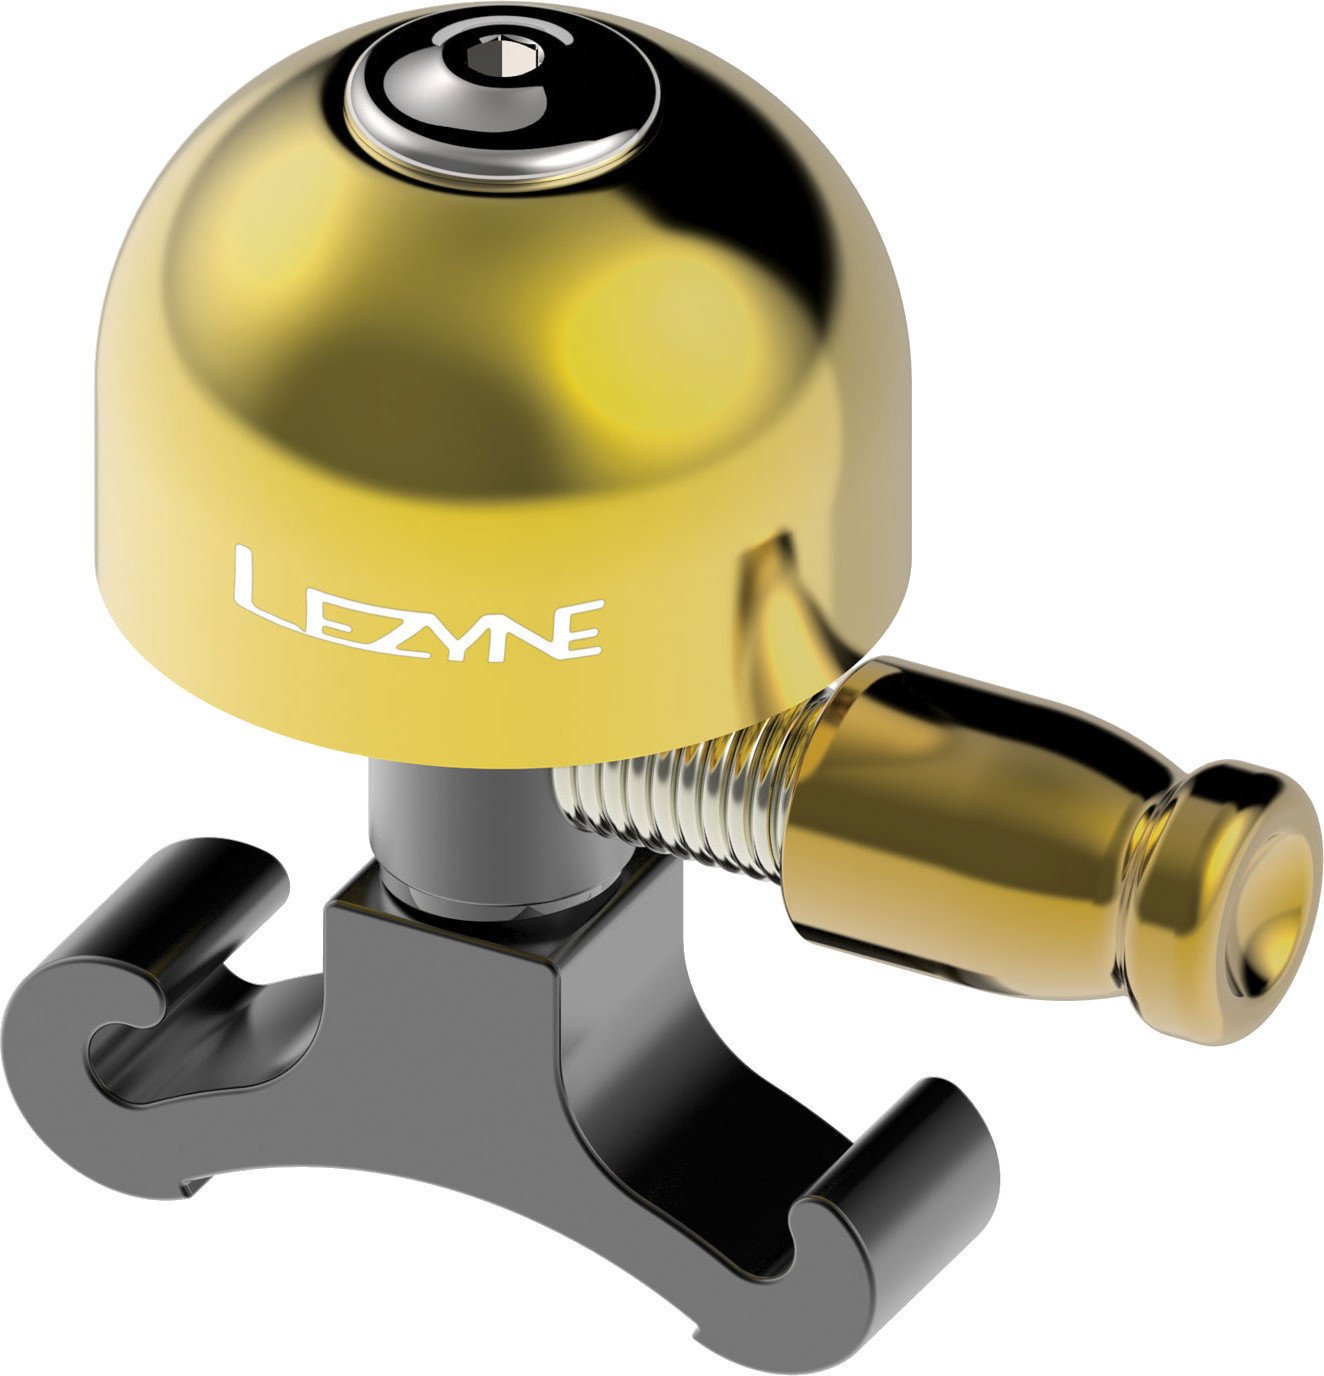 Bicycle Bell Lezyne Classic Brass Black S Bicycle Bell